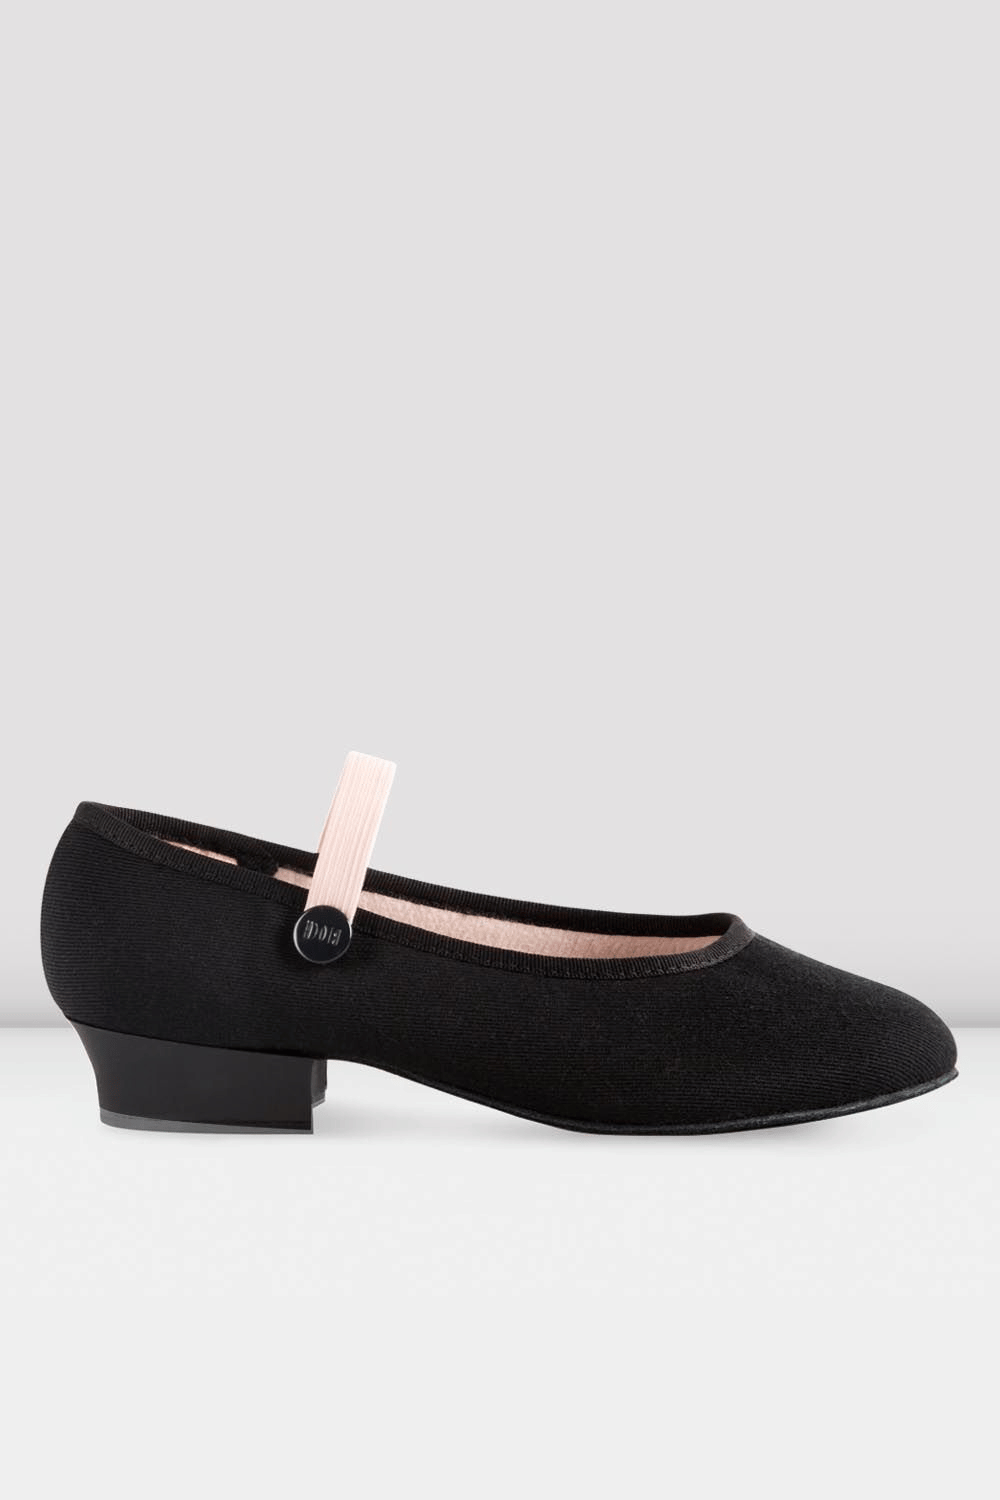 BLOCH Childrens Accent Low Heel Character Shoes, Black Canvas